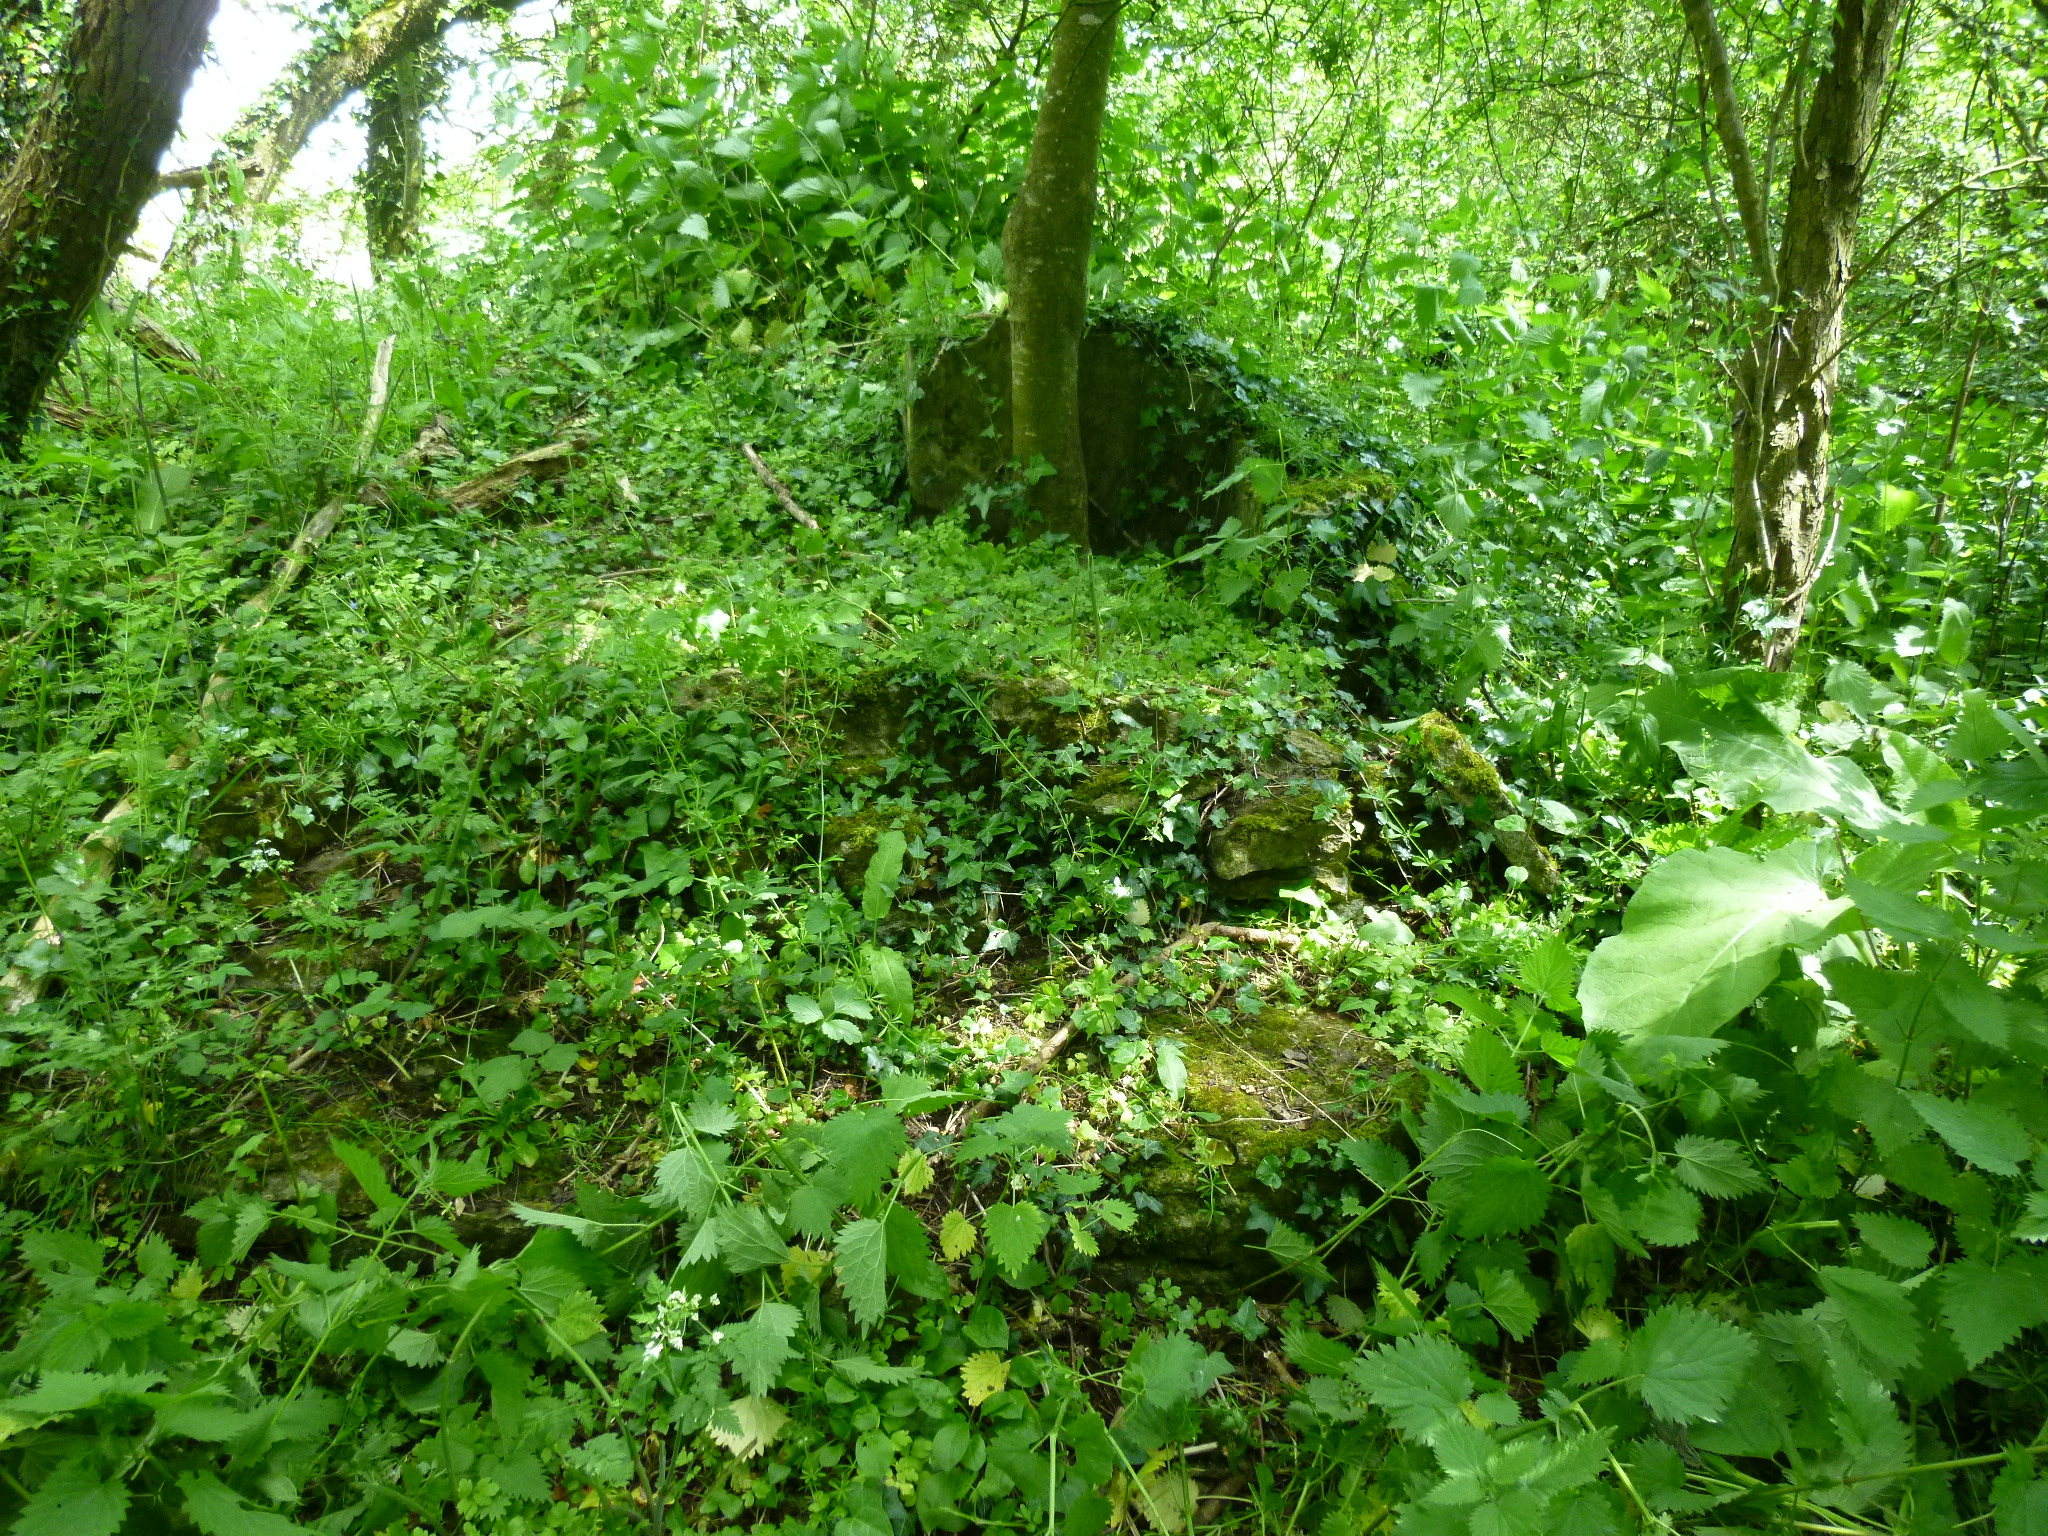 Bruton - Raggs Copse structure in woods